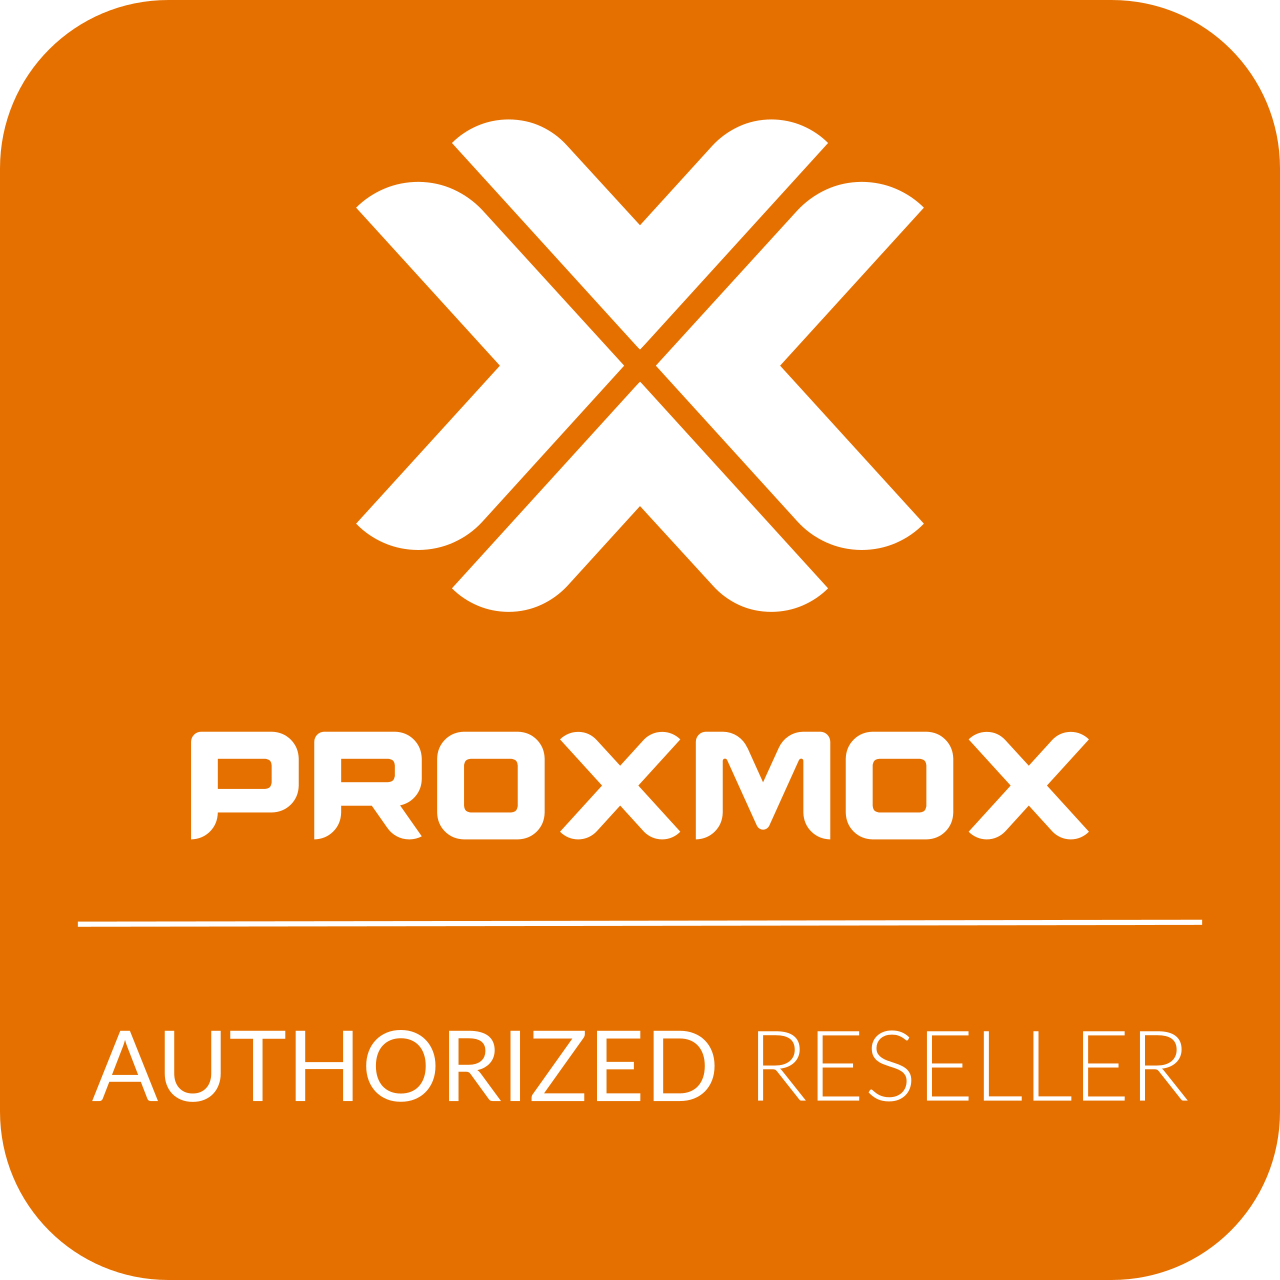 proxmox-authorized-reseller-logo-color